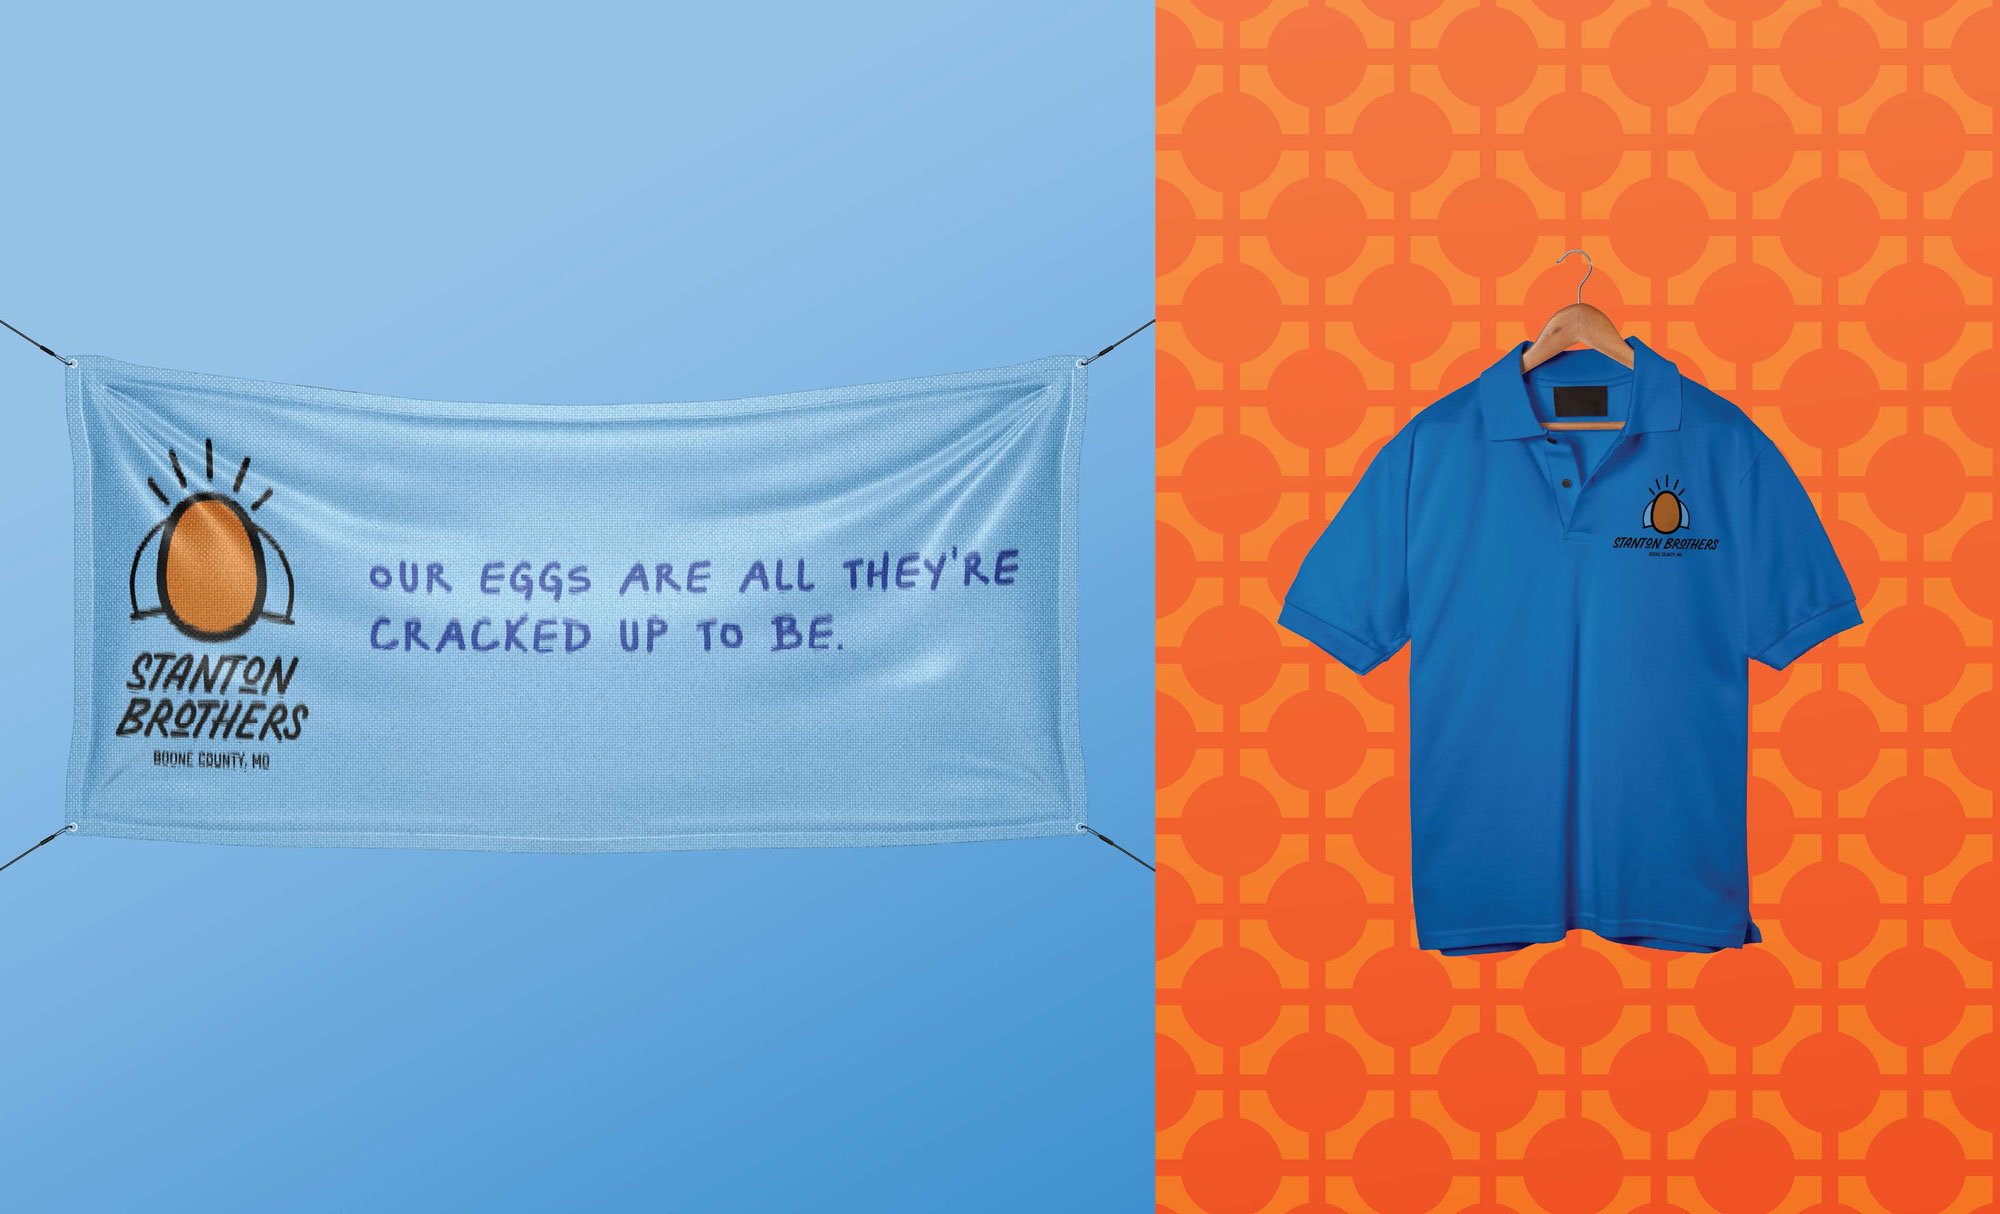  Stanton Brothers banner advertising mock-up with egg logo on a light blue background next to branded polo t-shirt. 